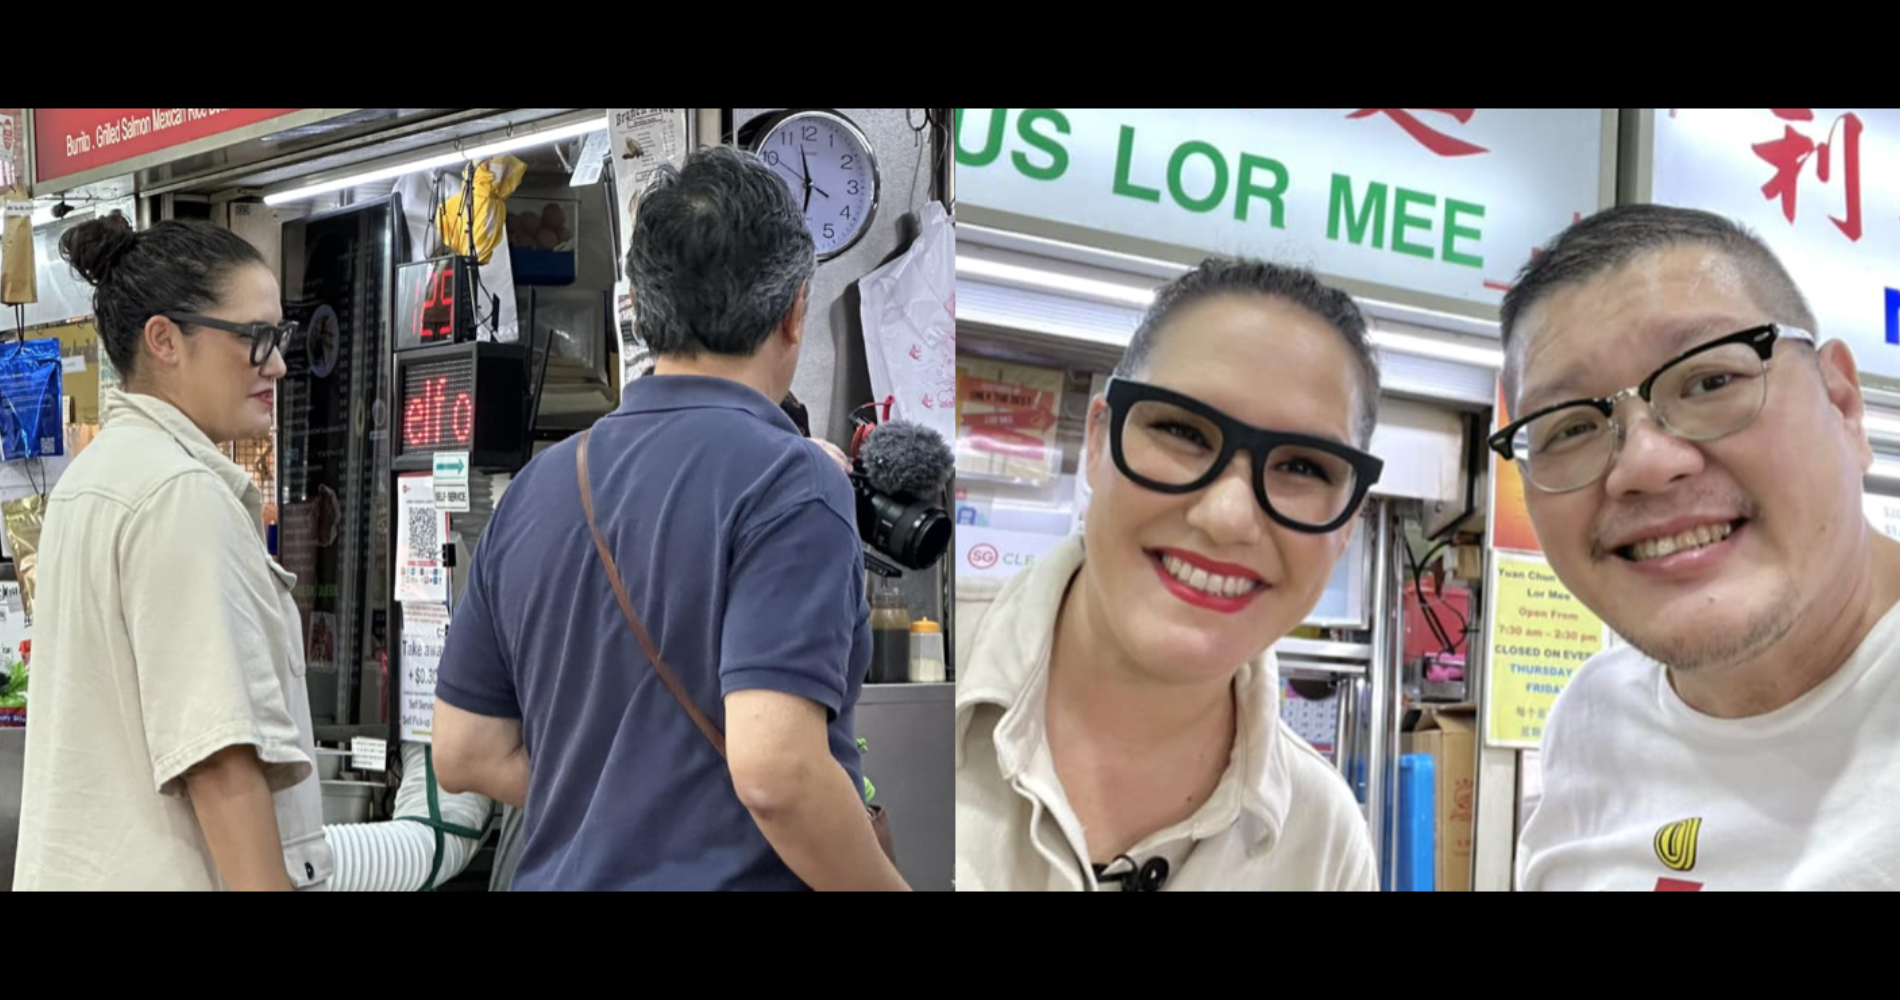 Yuan Chun Famous Lor Mee at Amoy Street Hawker Centre Attracts International Celebrity Chef Marion Grasby